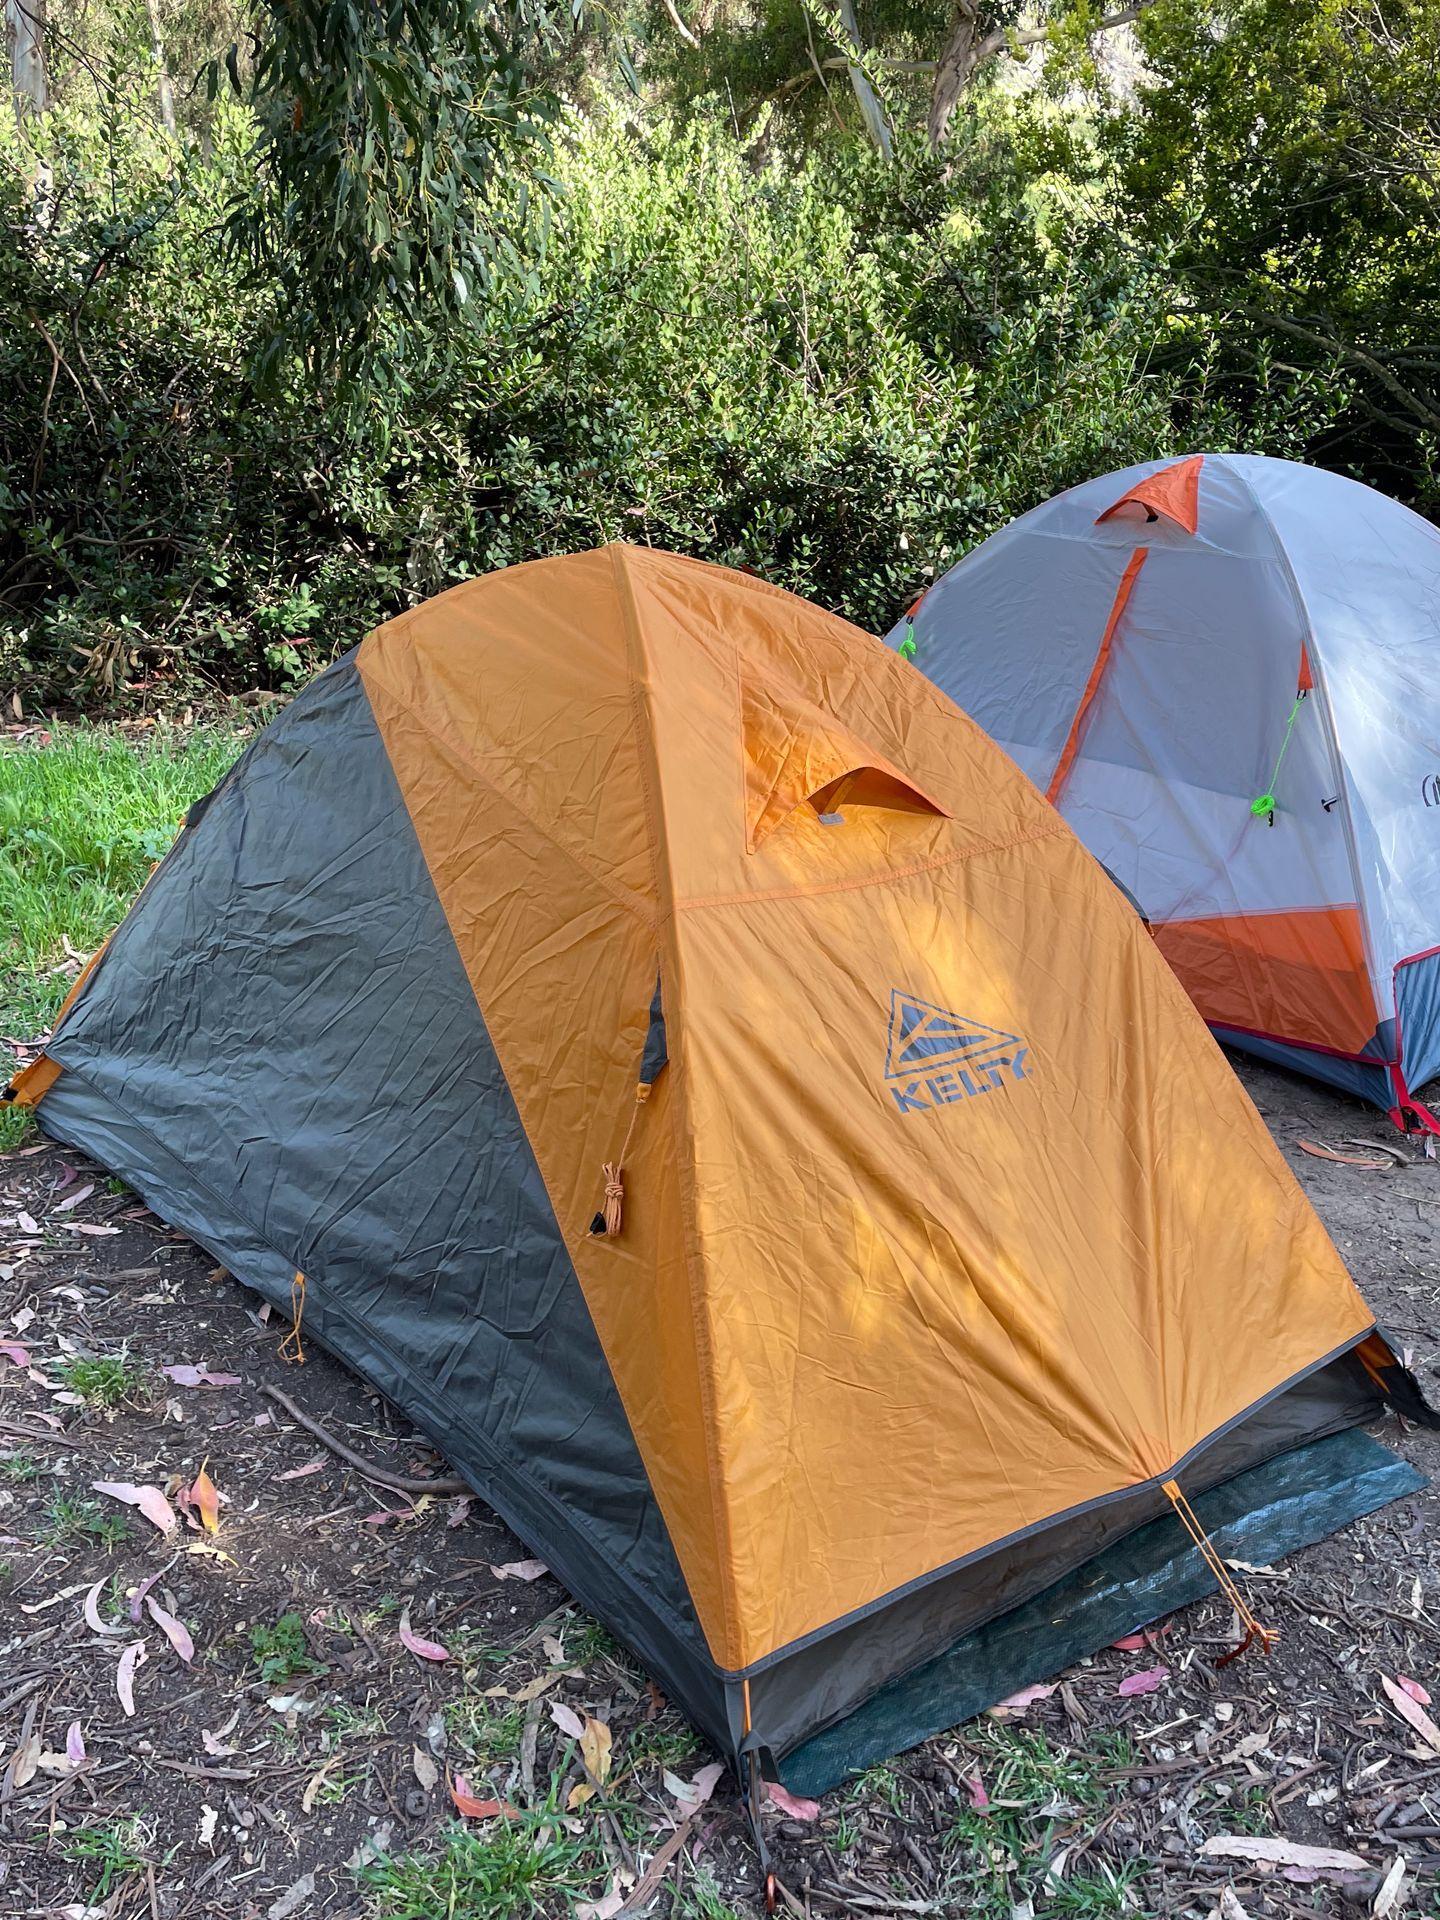 Two tents at the Scopion Canyon Campground